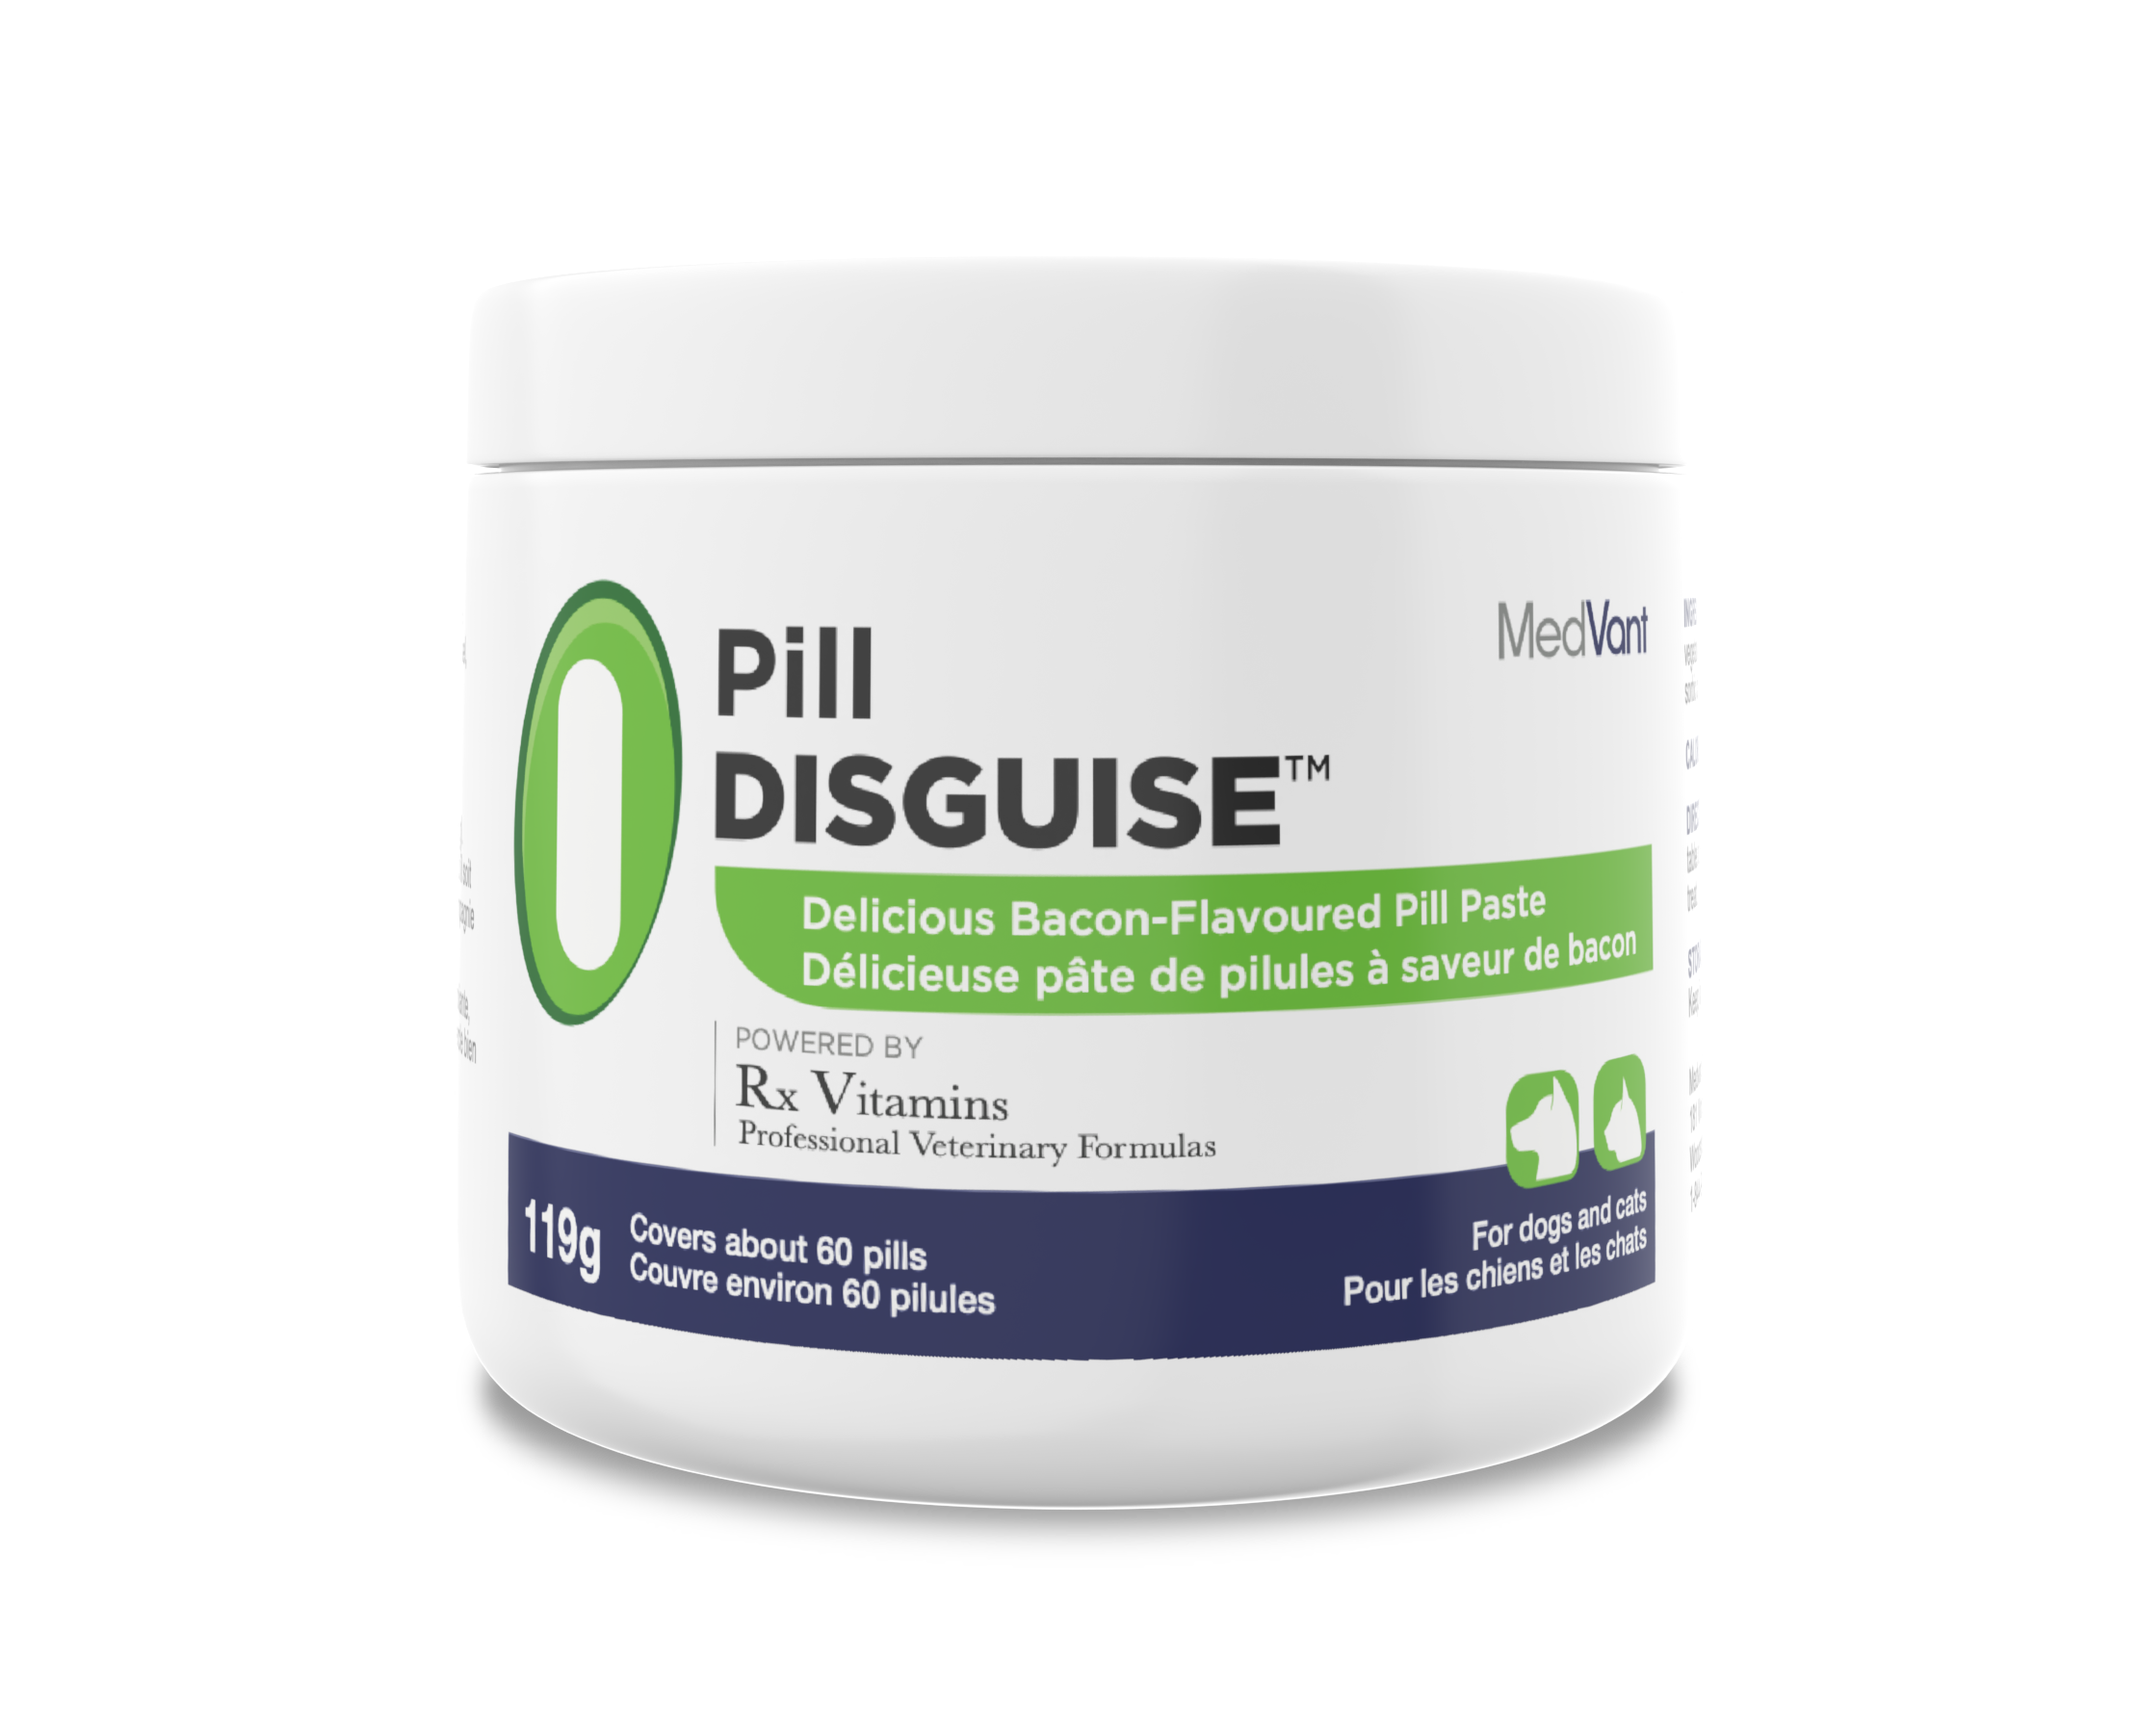 Pill Disguise™